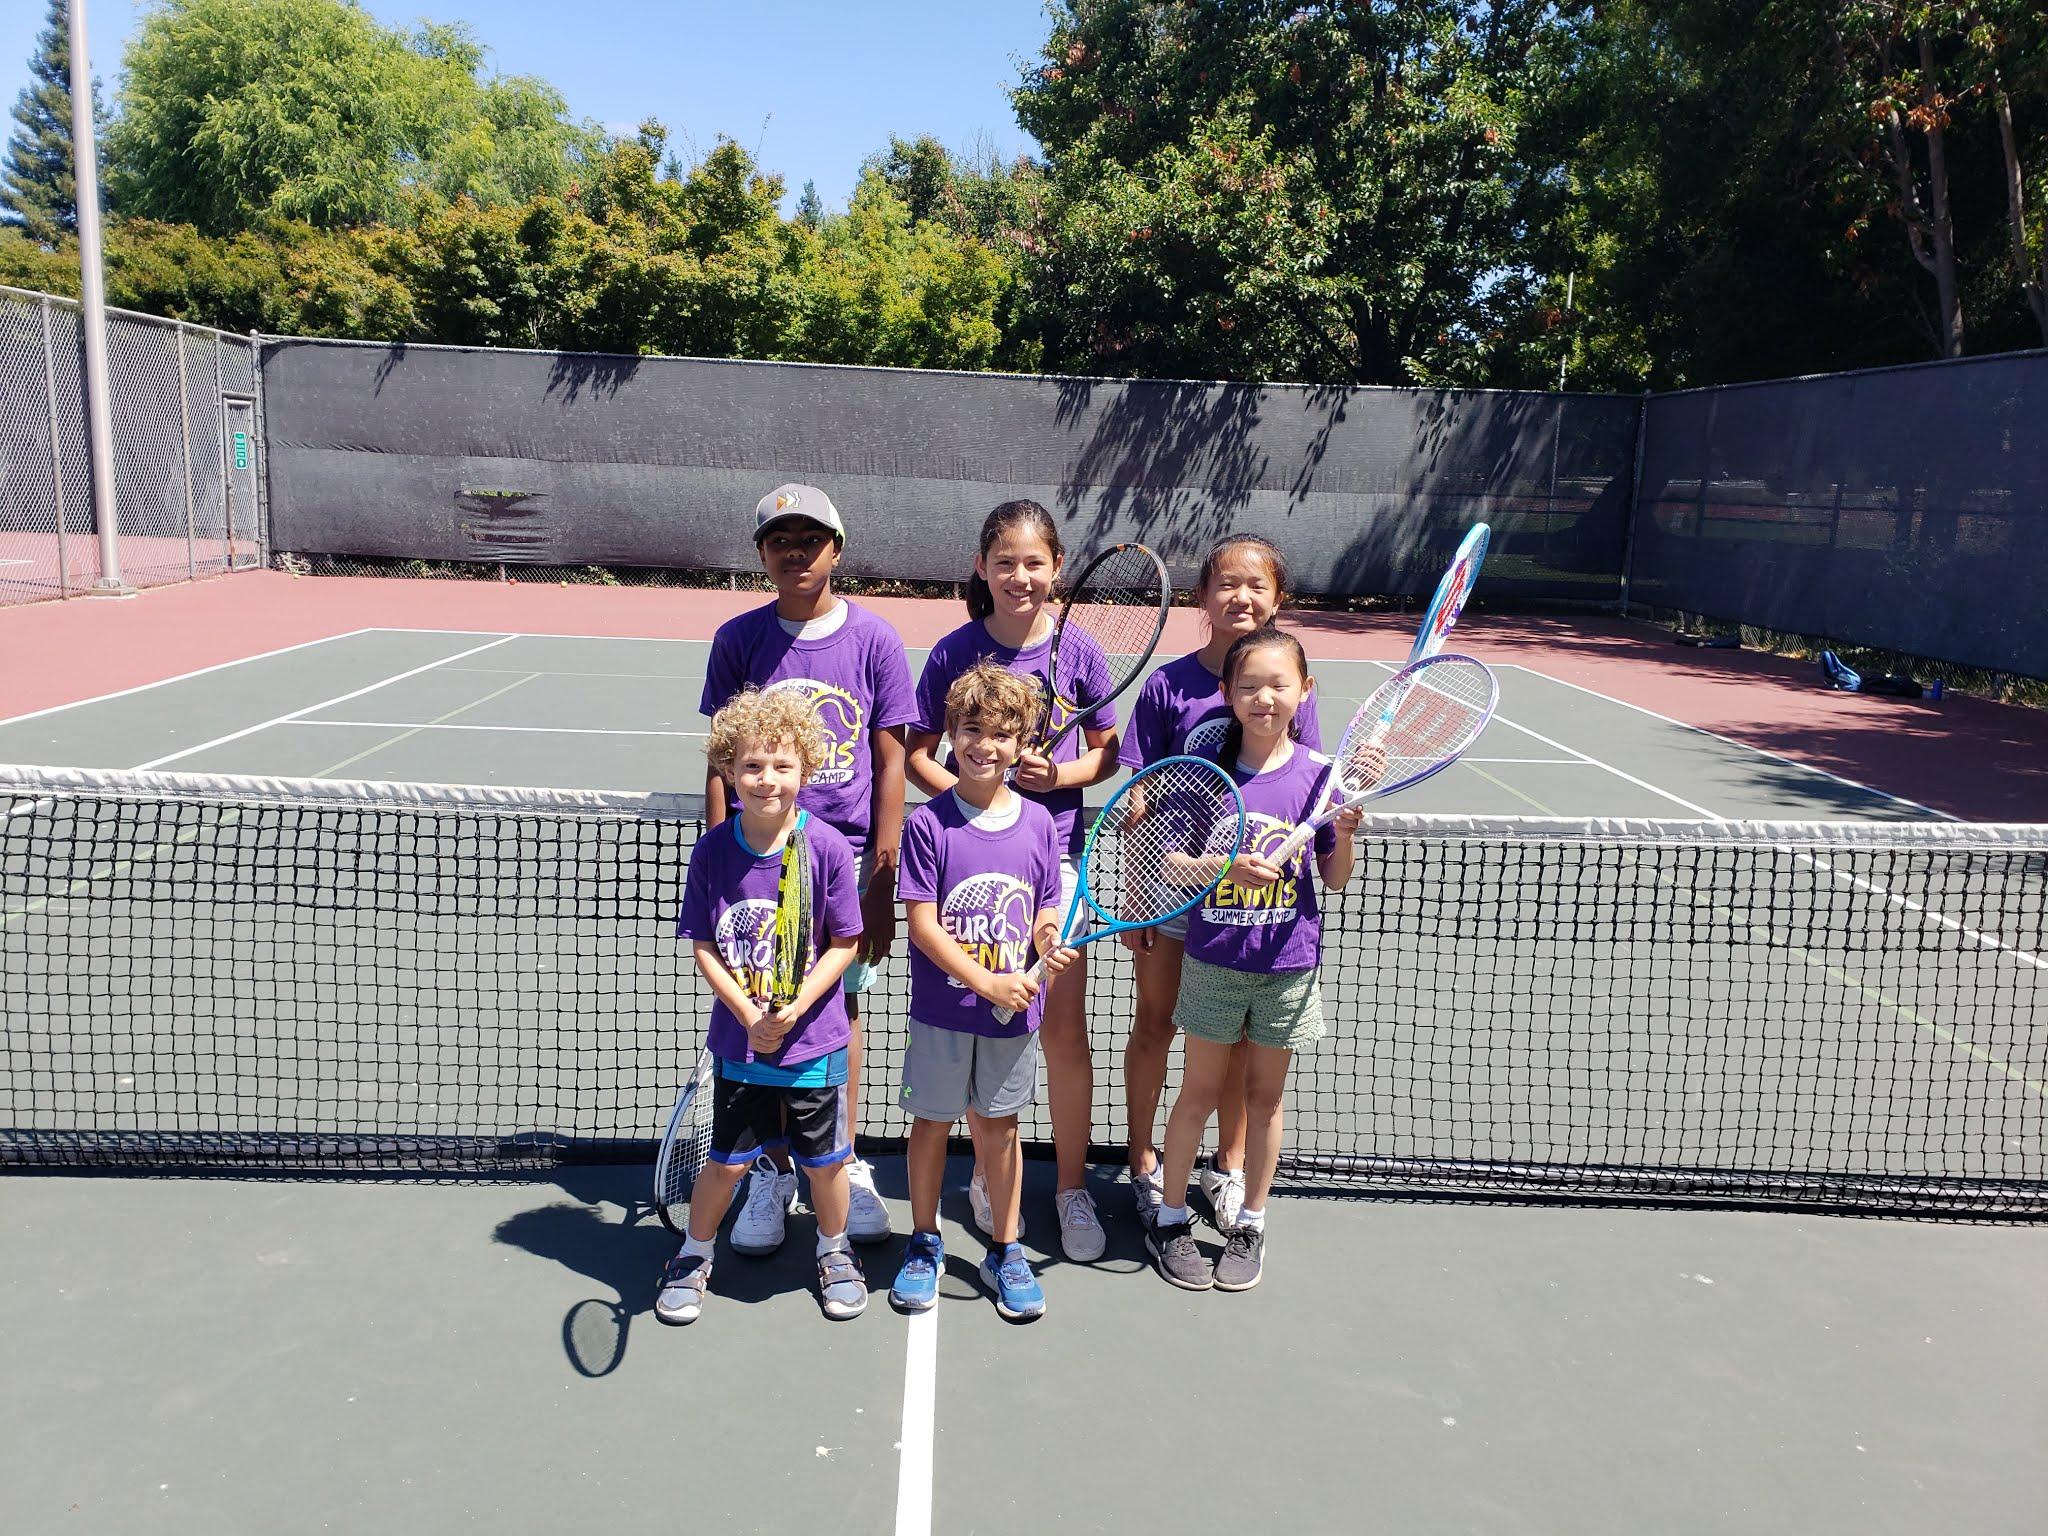 Paid Kids Tennis Classes in Fremont (Novice Ages 6-8)